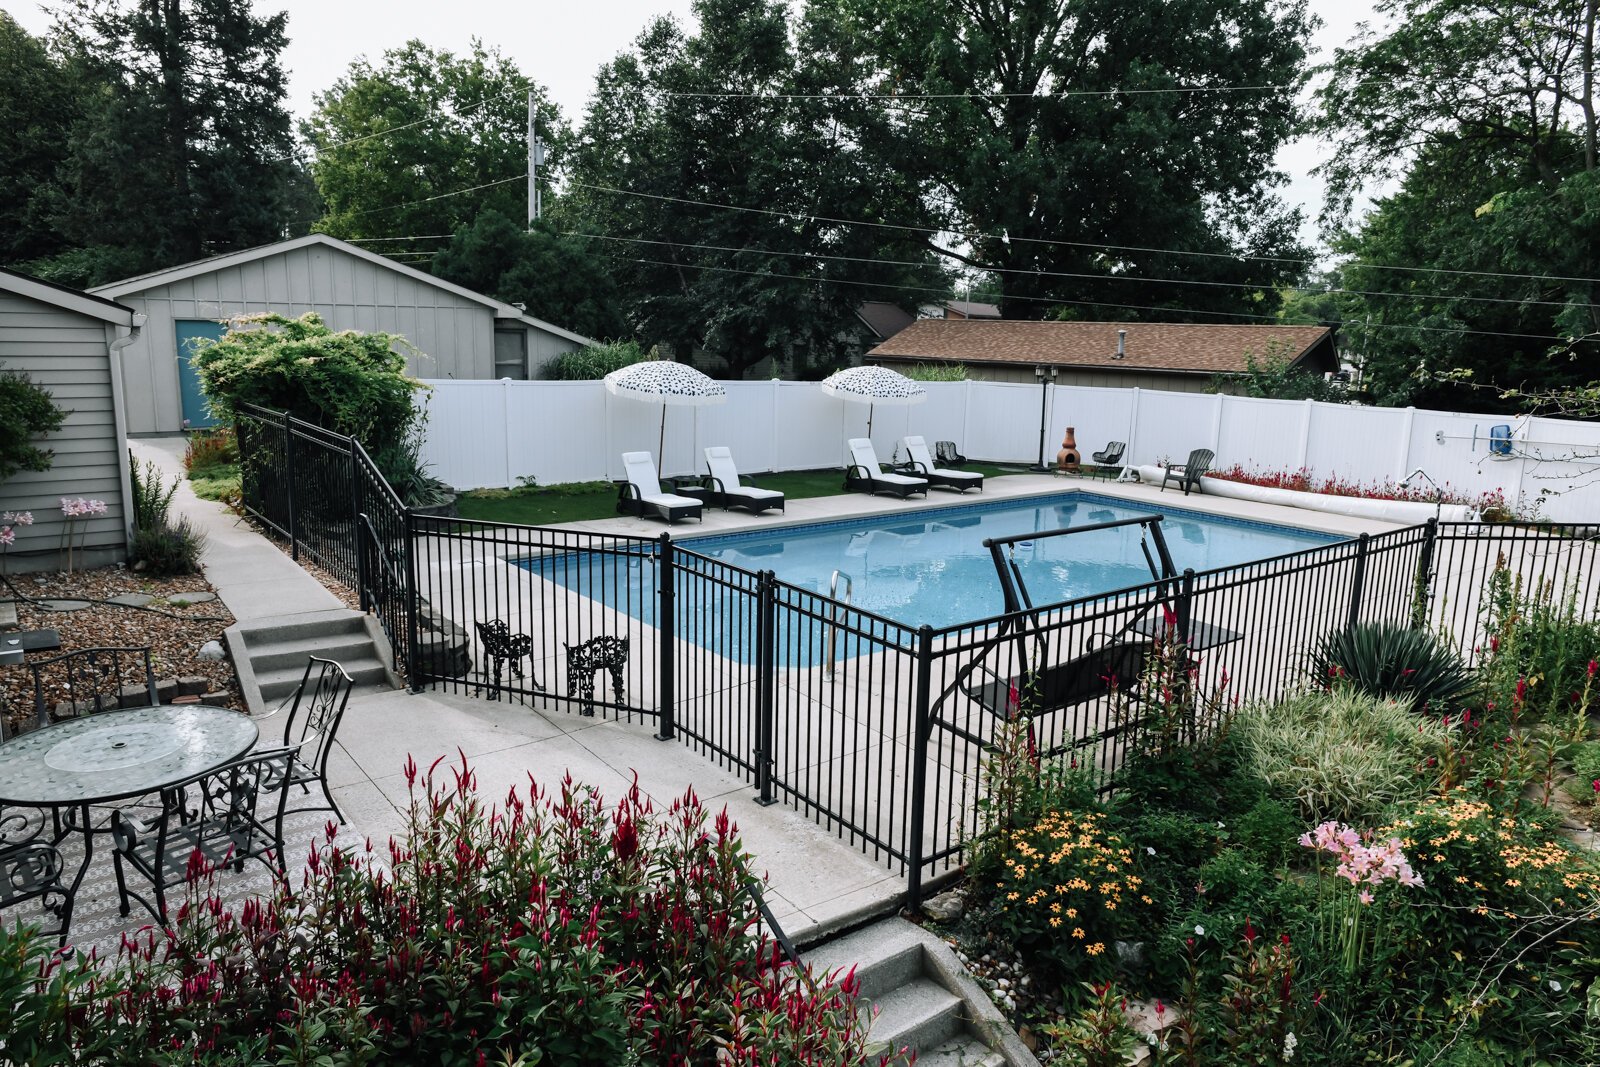 The pool from the view of the master bedroom in the Airbnb owned by Olivia Nelson in Fort Wayne.